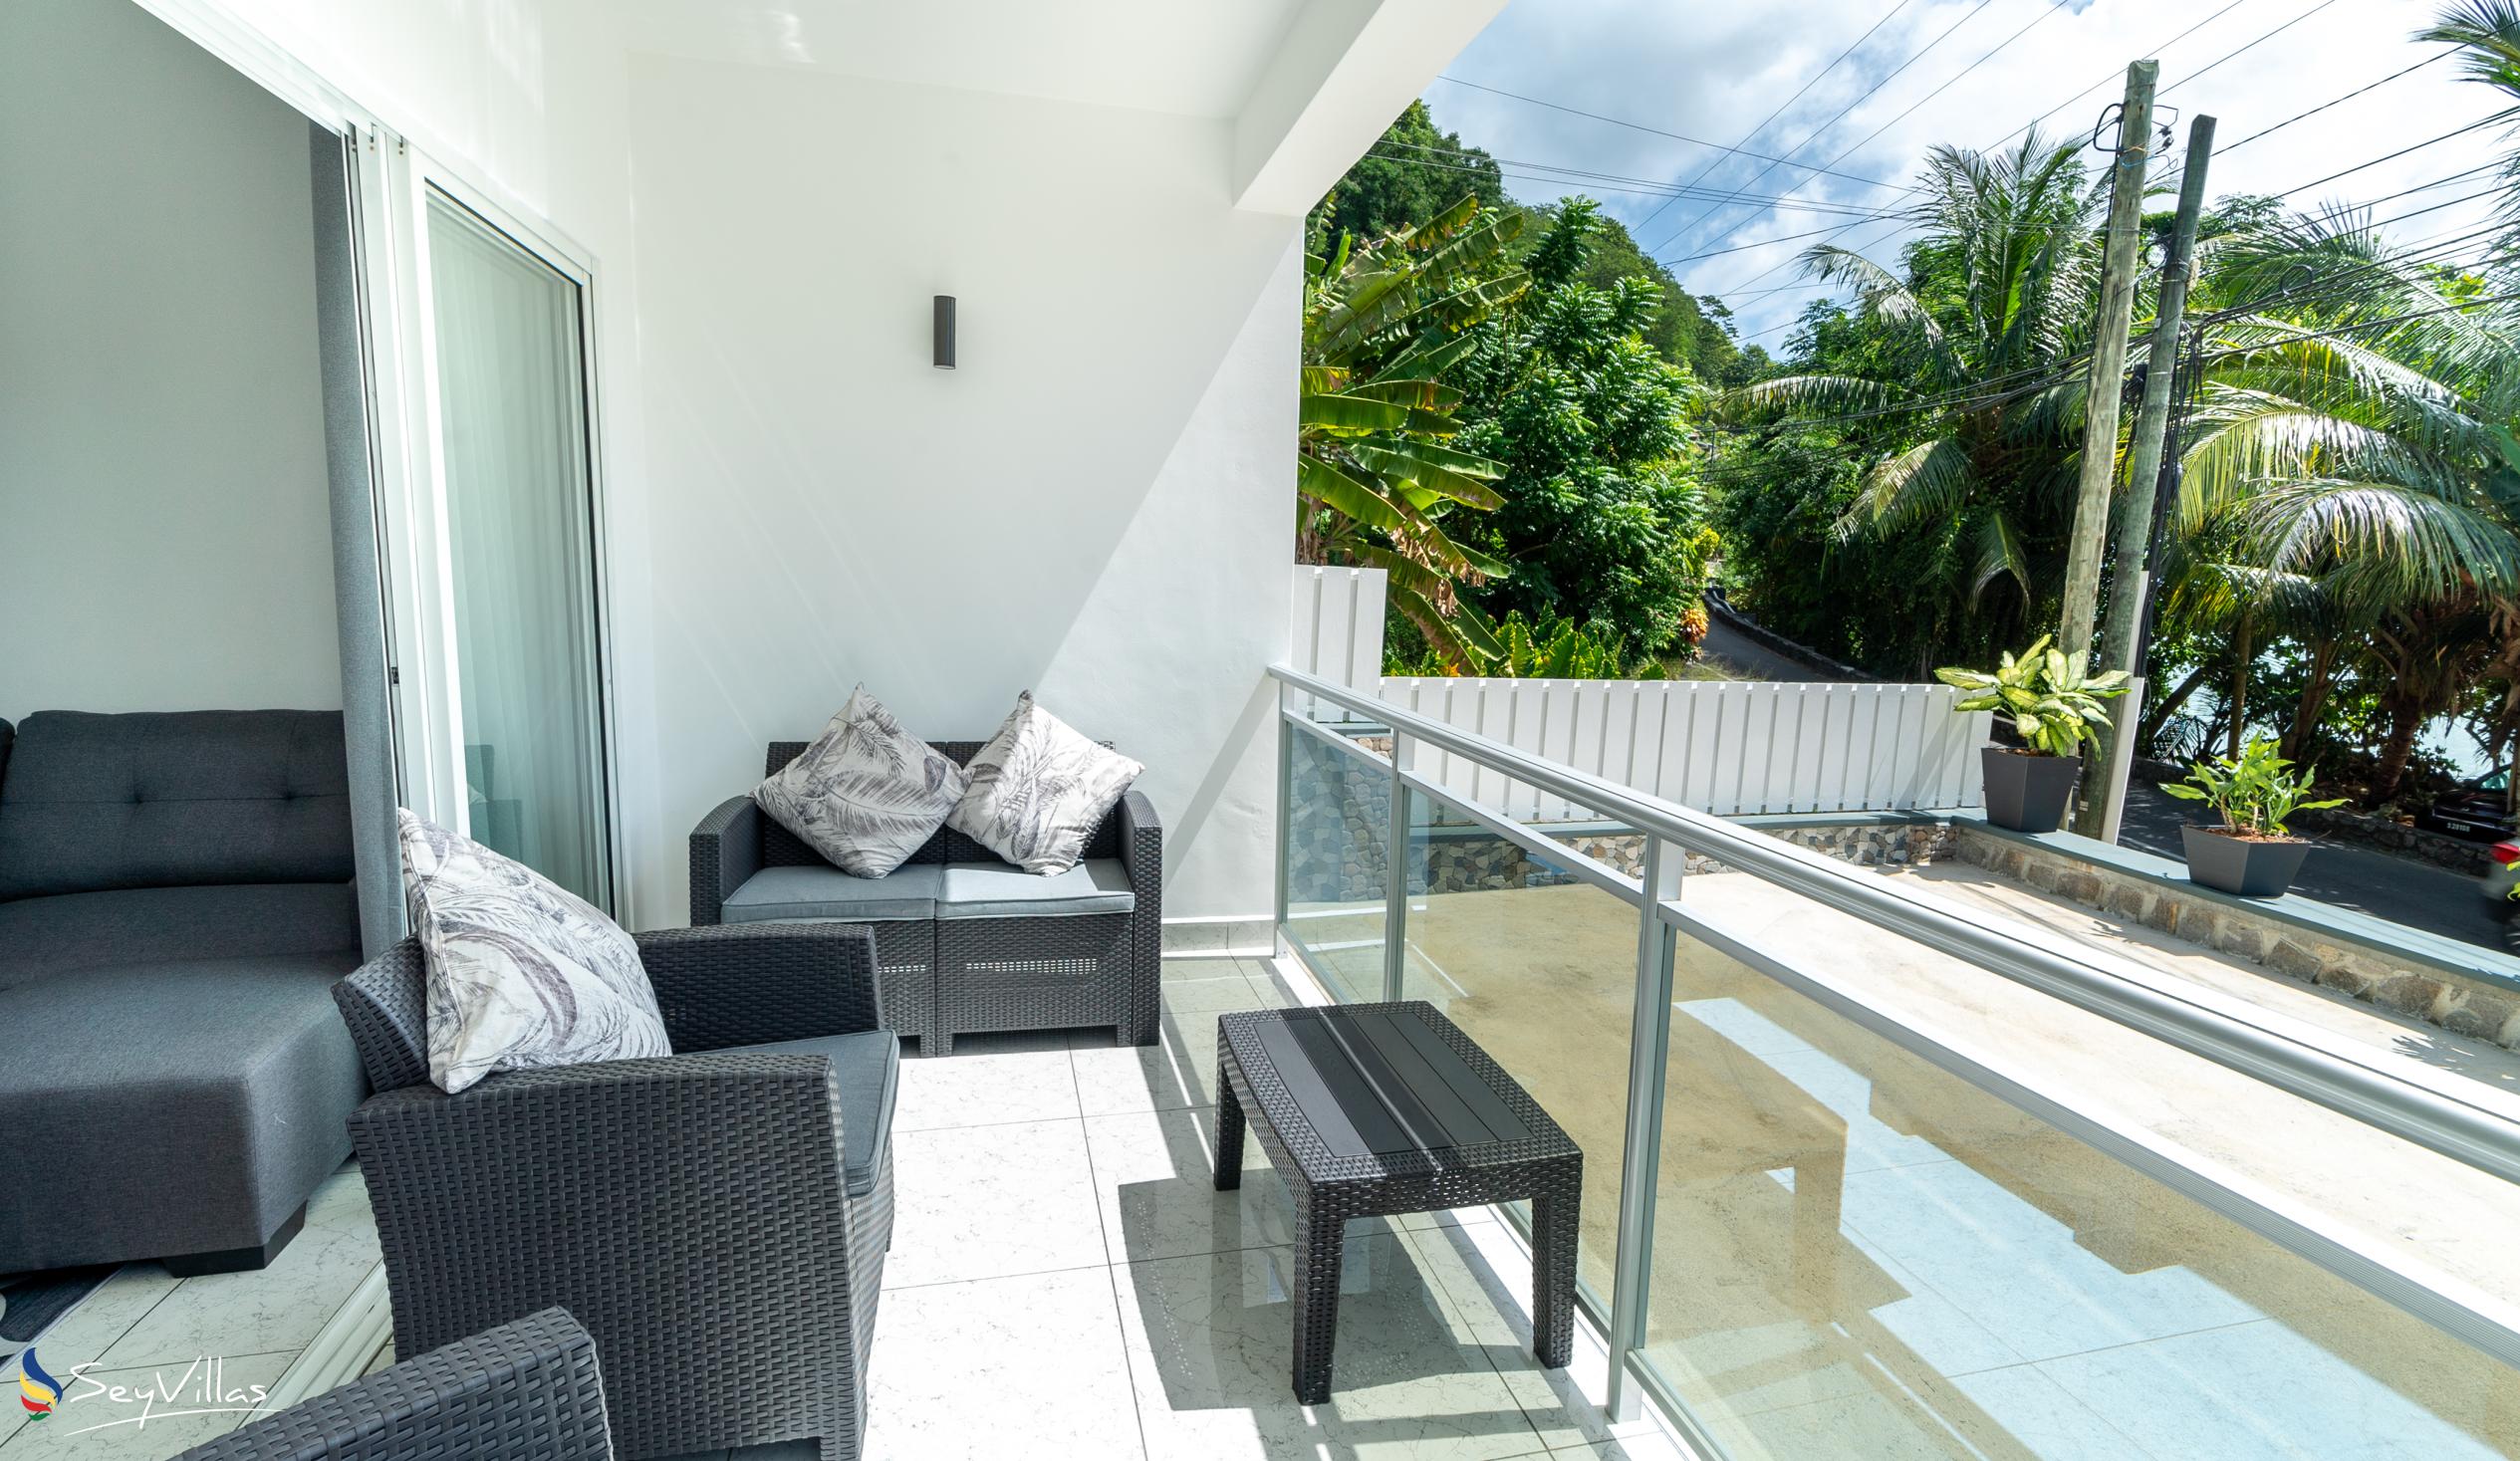 Photo 7: TES Self Catering - Outdoor area - Mahé (Seychelles)